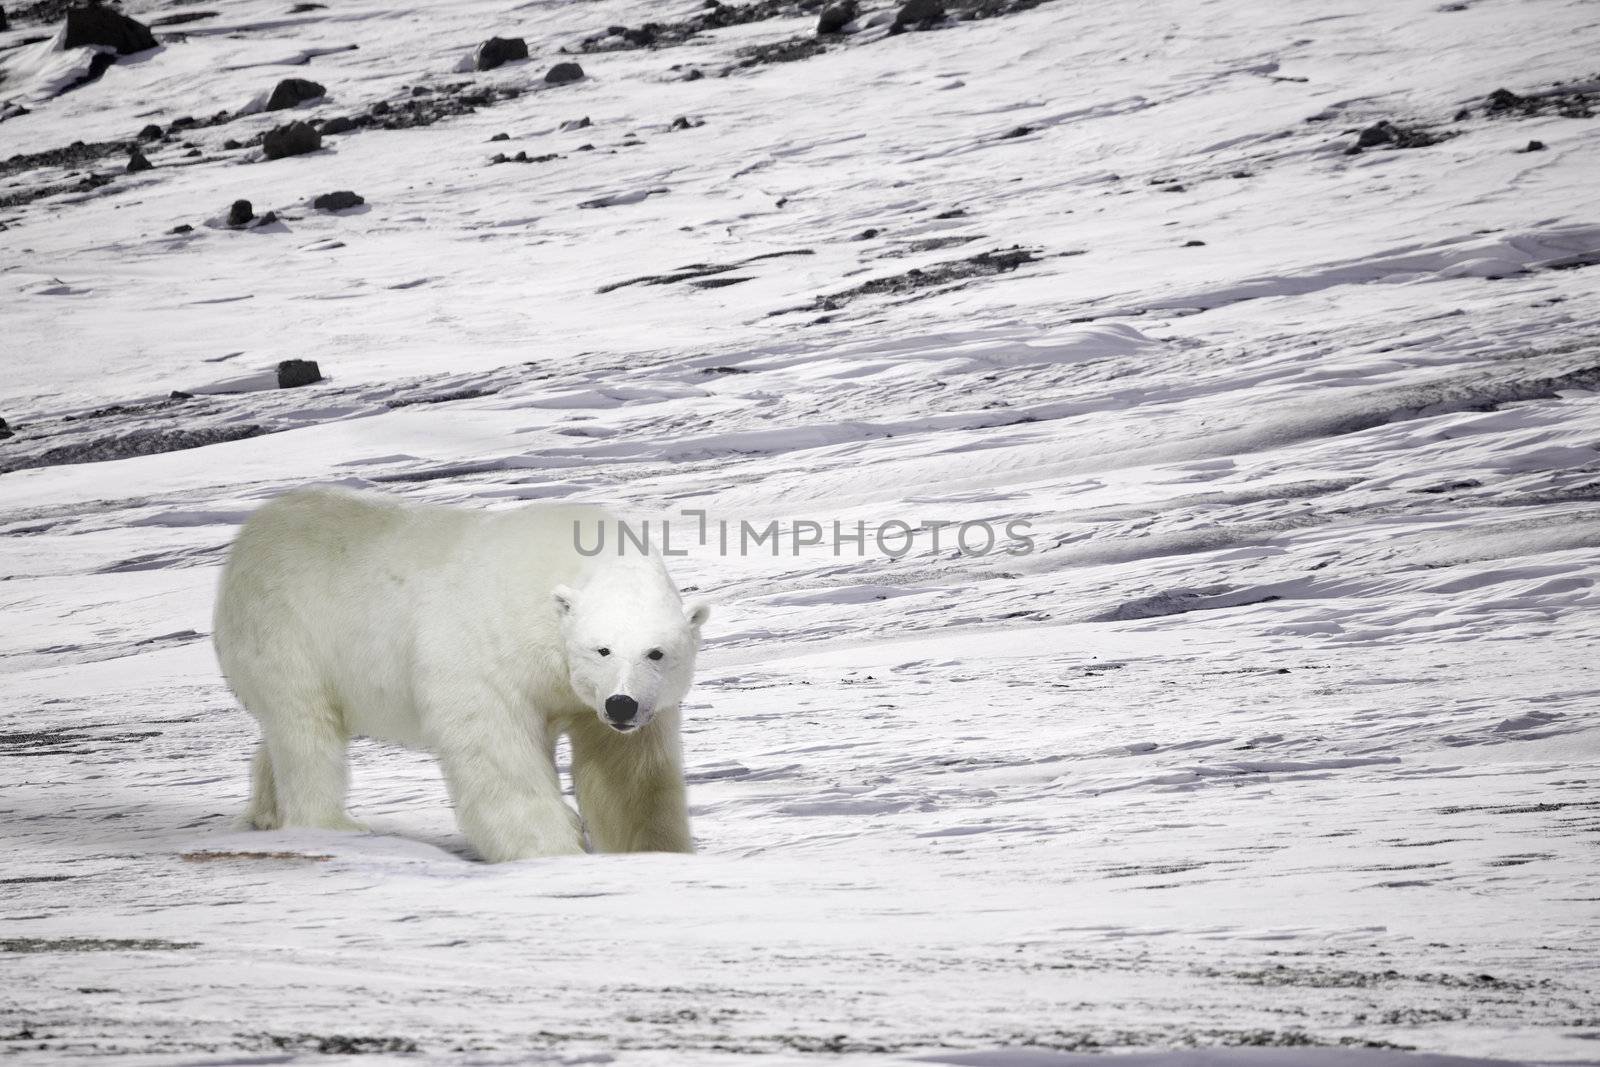 A polar bear in a wild natural setting, Svalbard, Norway